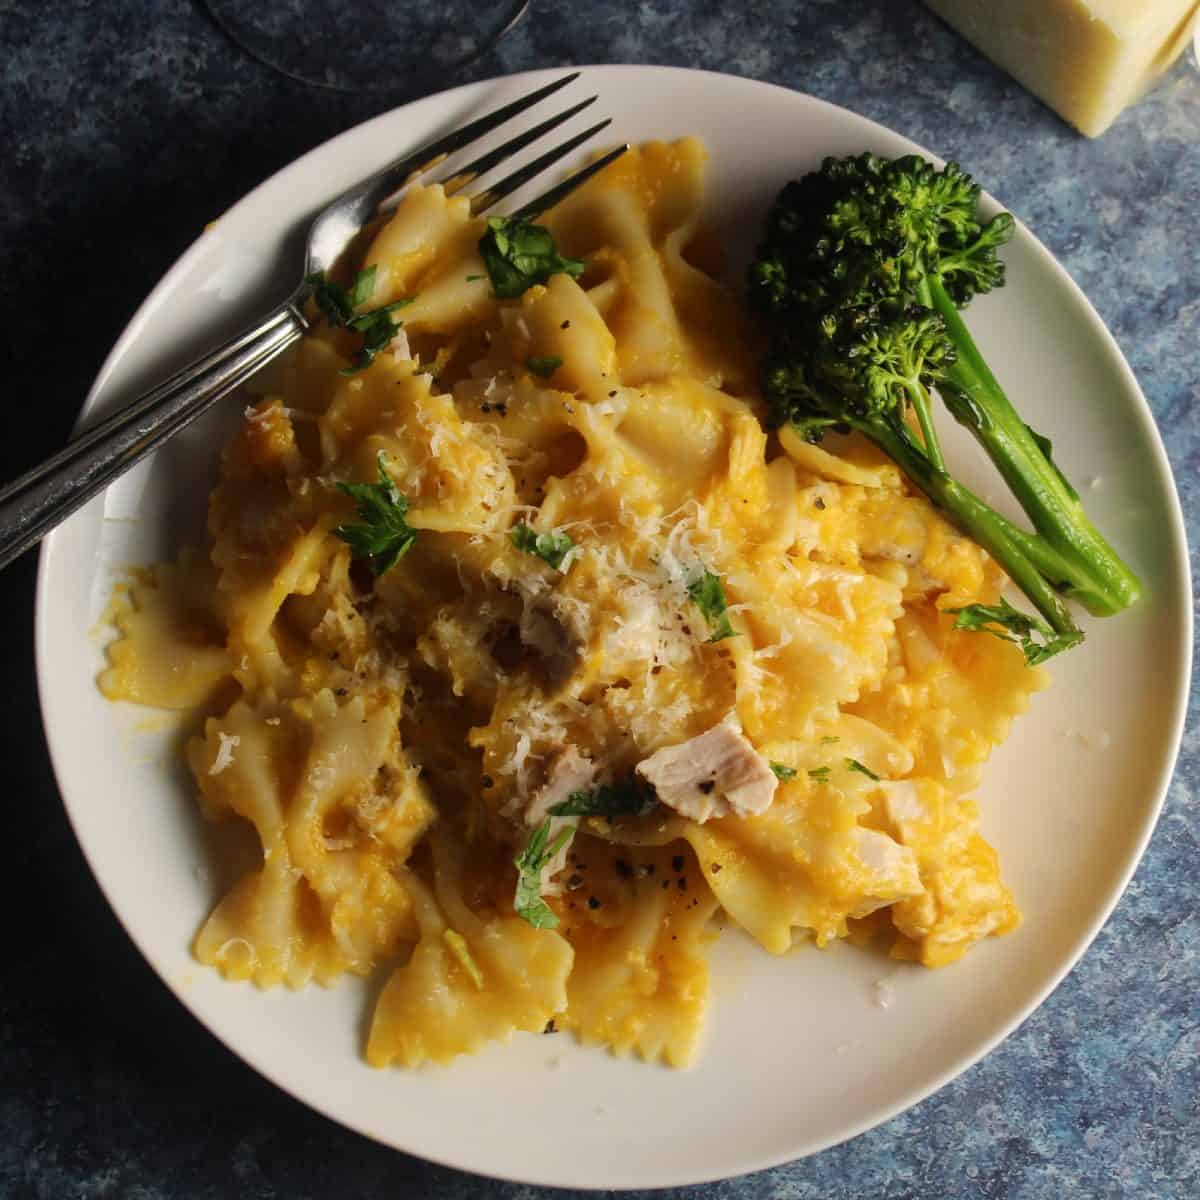 bowtie pasta with a butternut squash sauce and leftover turkey, on white plate with a side of broccoli.